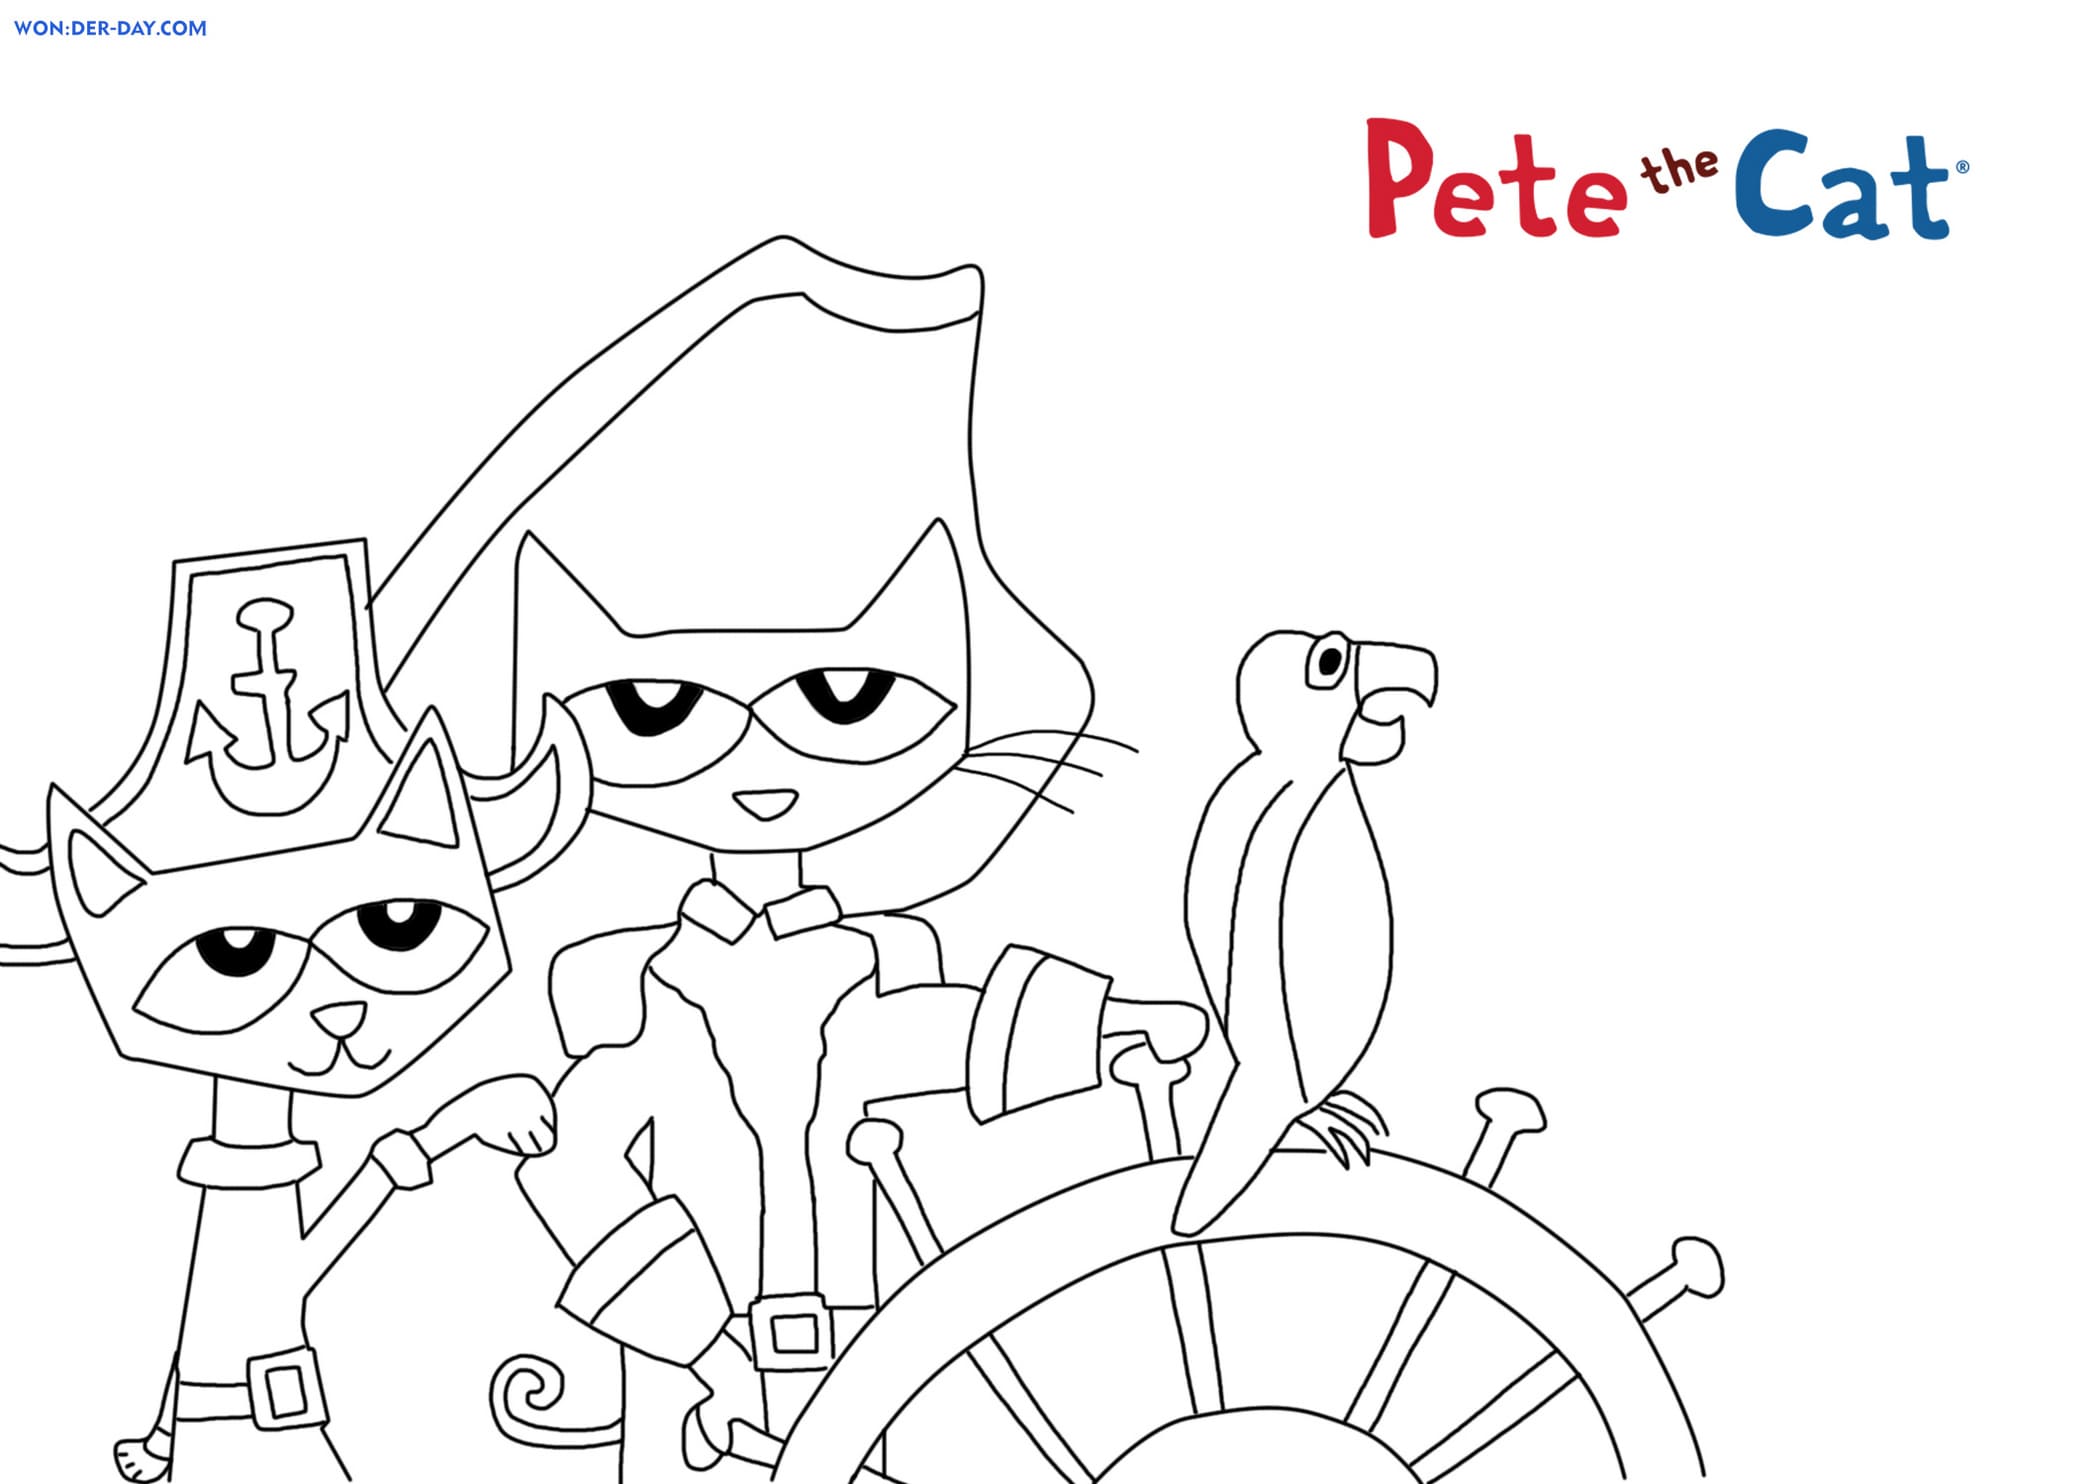 Pete The Cat Coloring Pages. Free Coloring Pages | Wonder Day